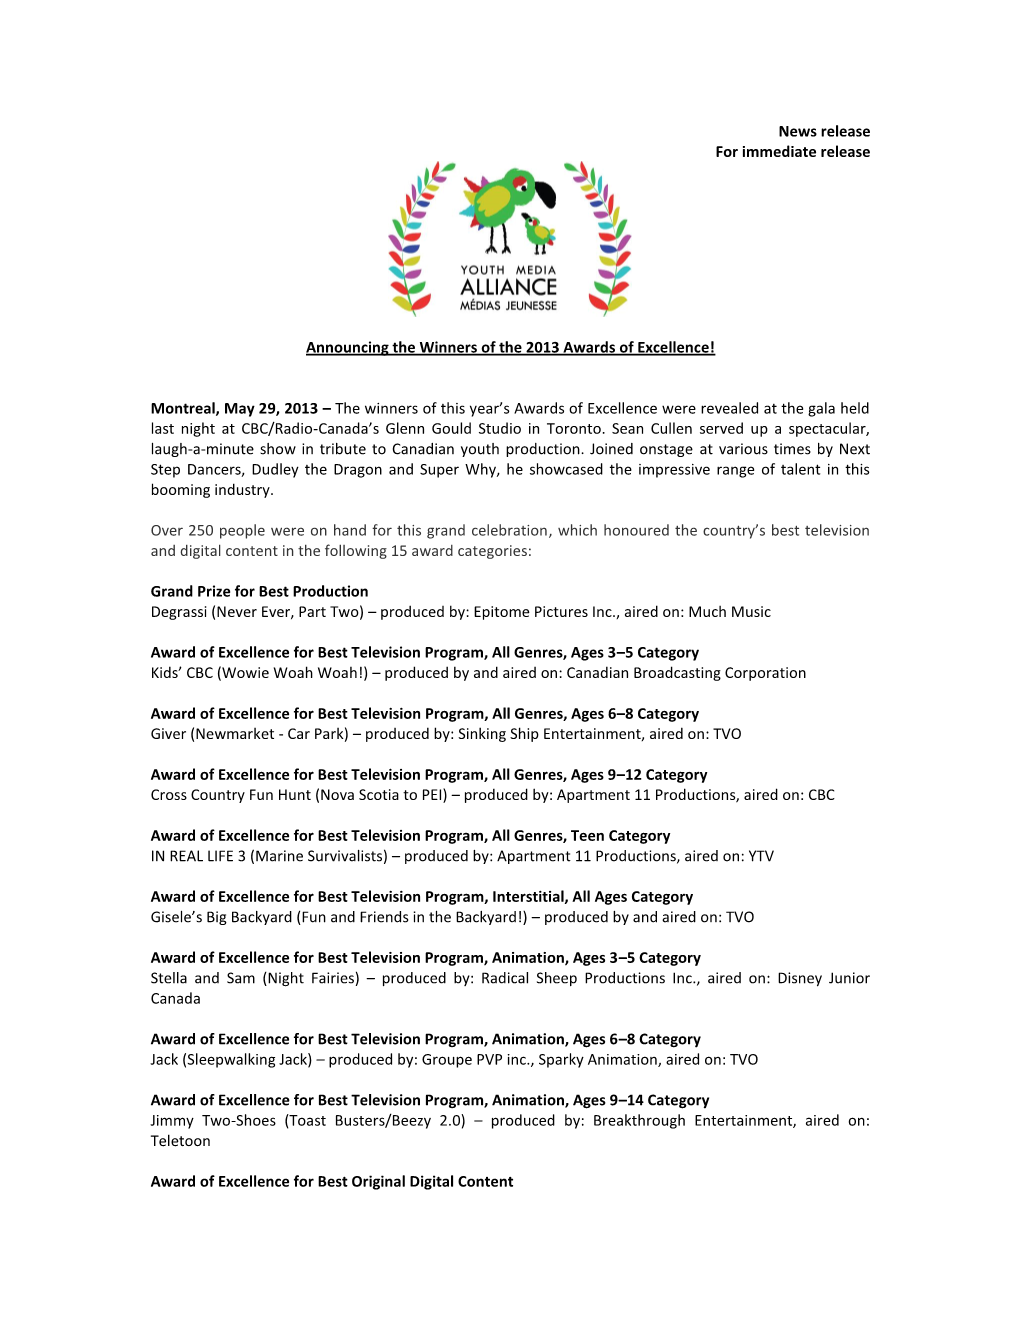 News Release for Immediate Release Announcing the Winners of The